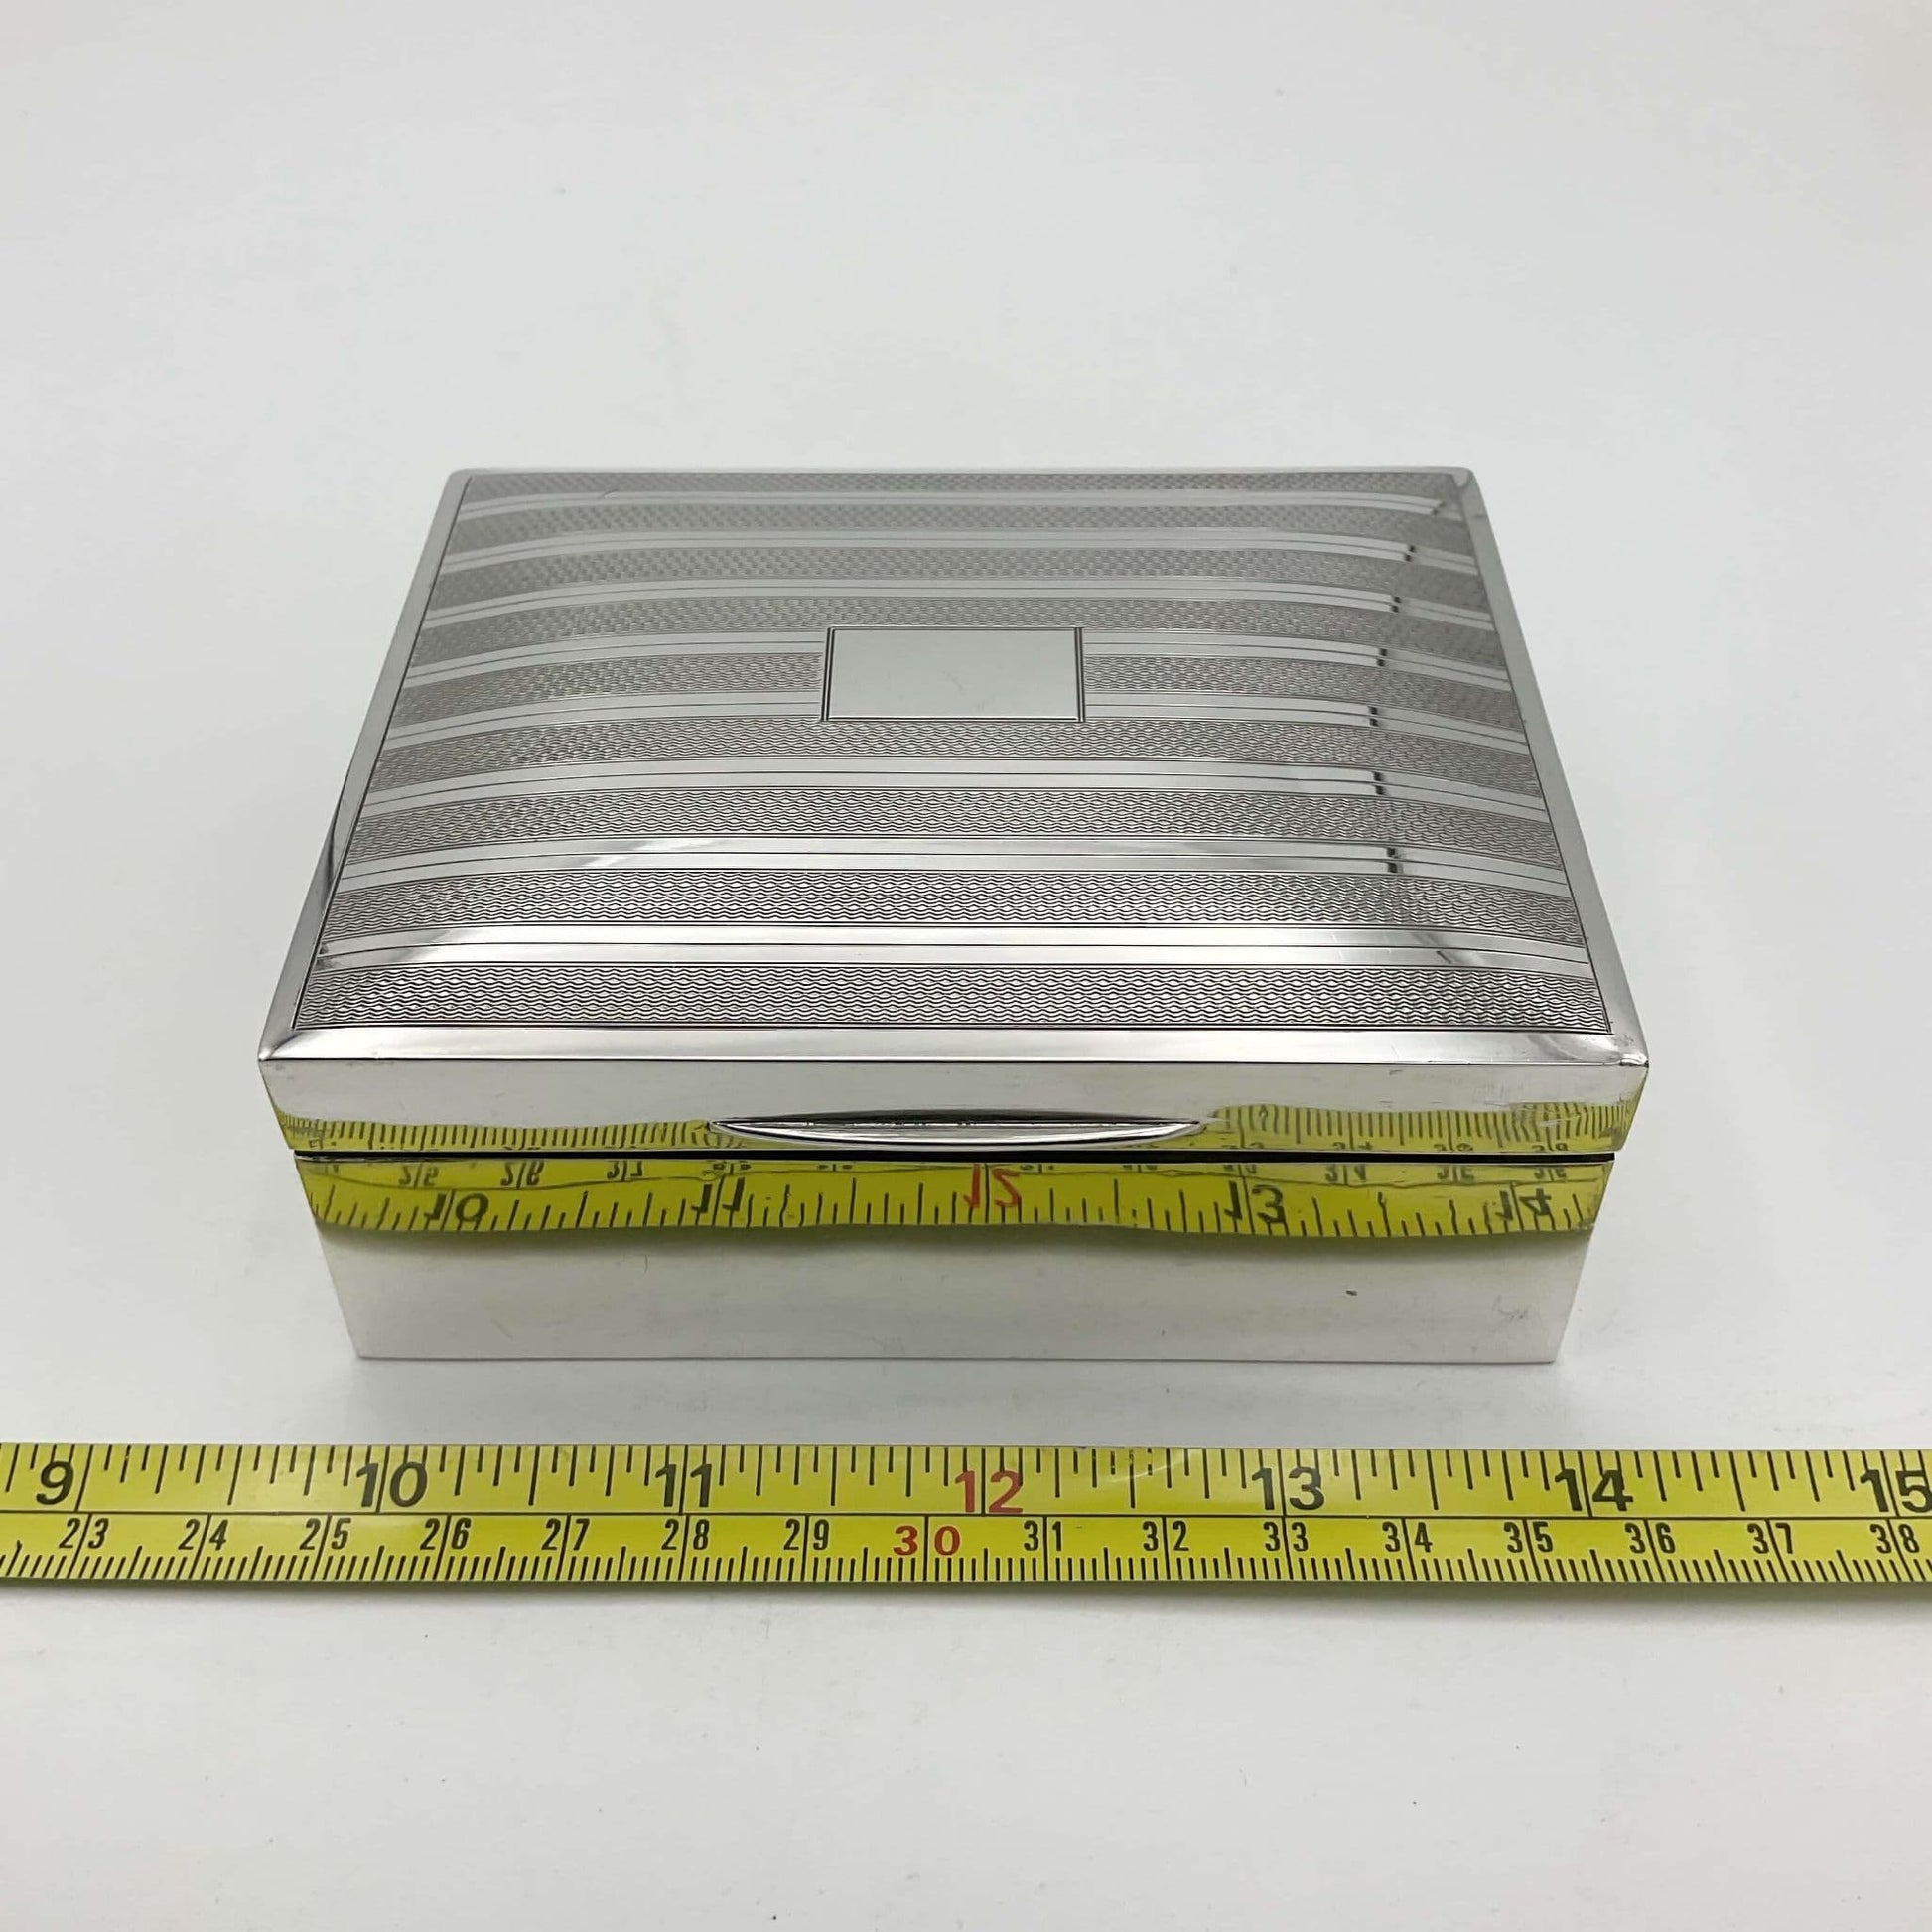 1920s vintage silver cigarette box next to a tape measure showing it's width as 10.5cm